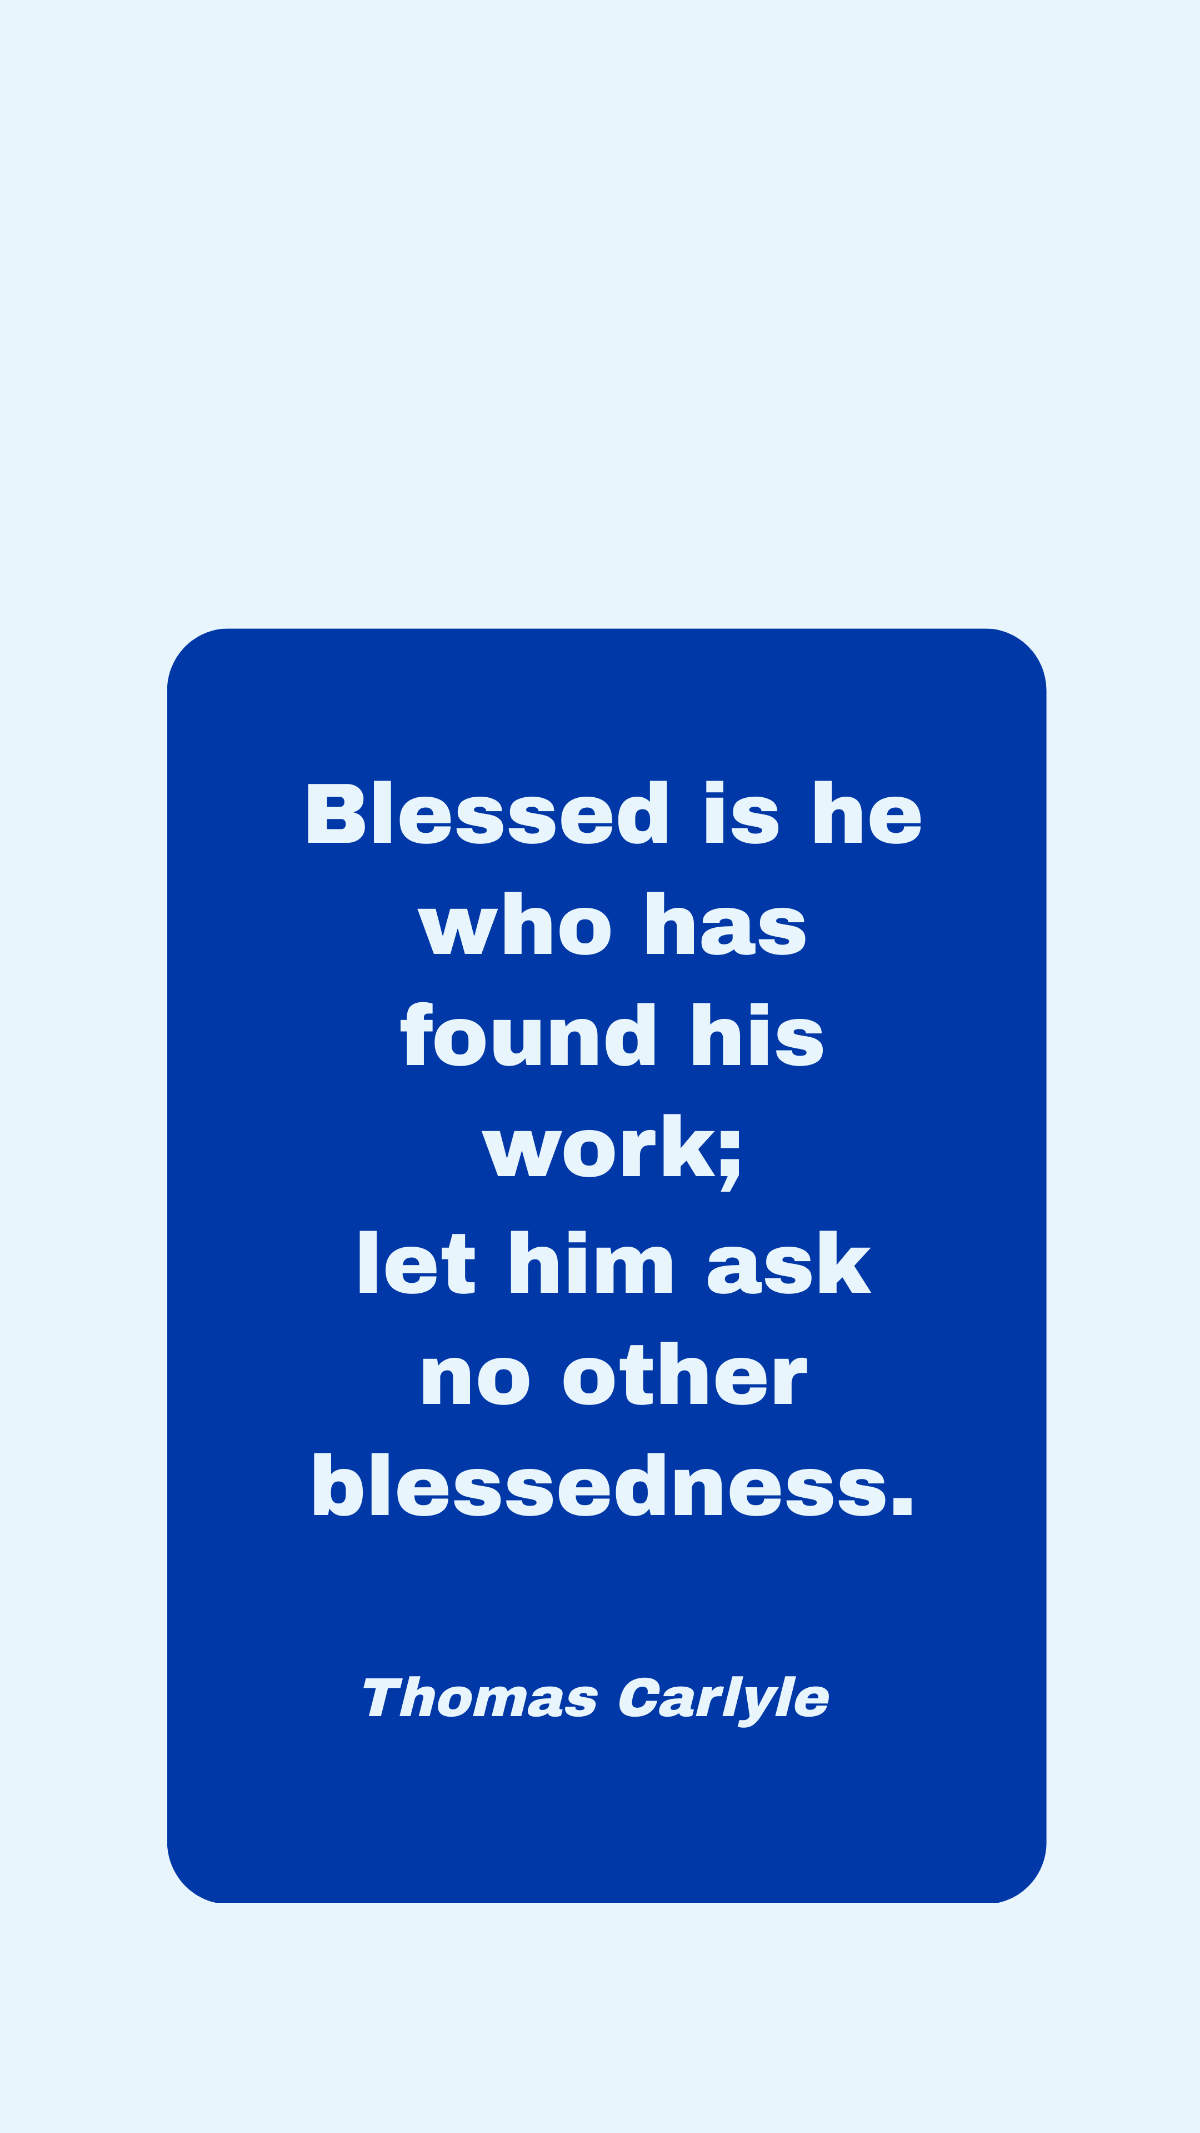 Free Thomas Carlyle - Blessed is he who has found his work; let him ask no other blessedness. Template